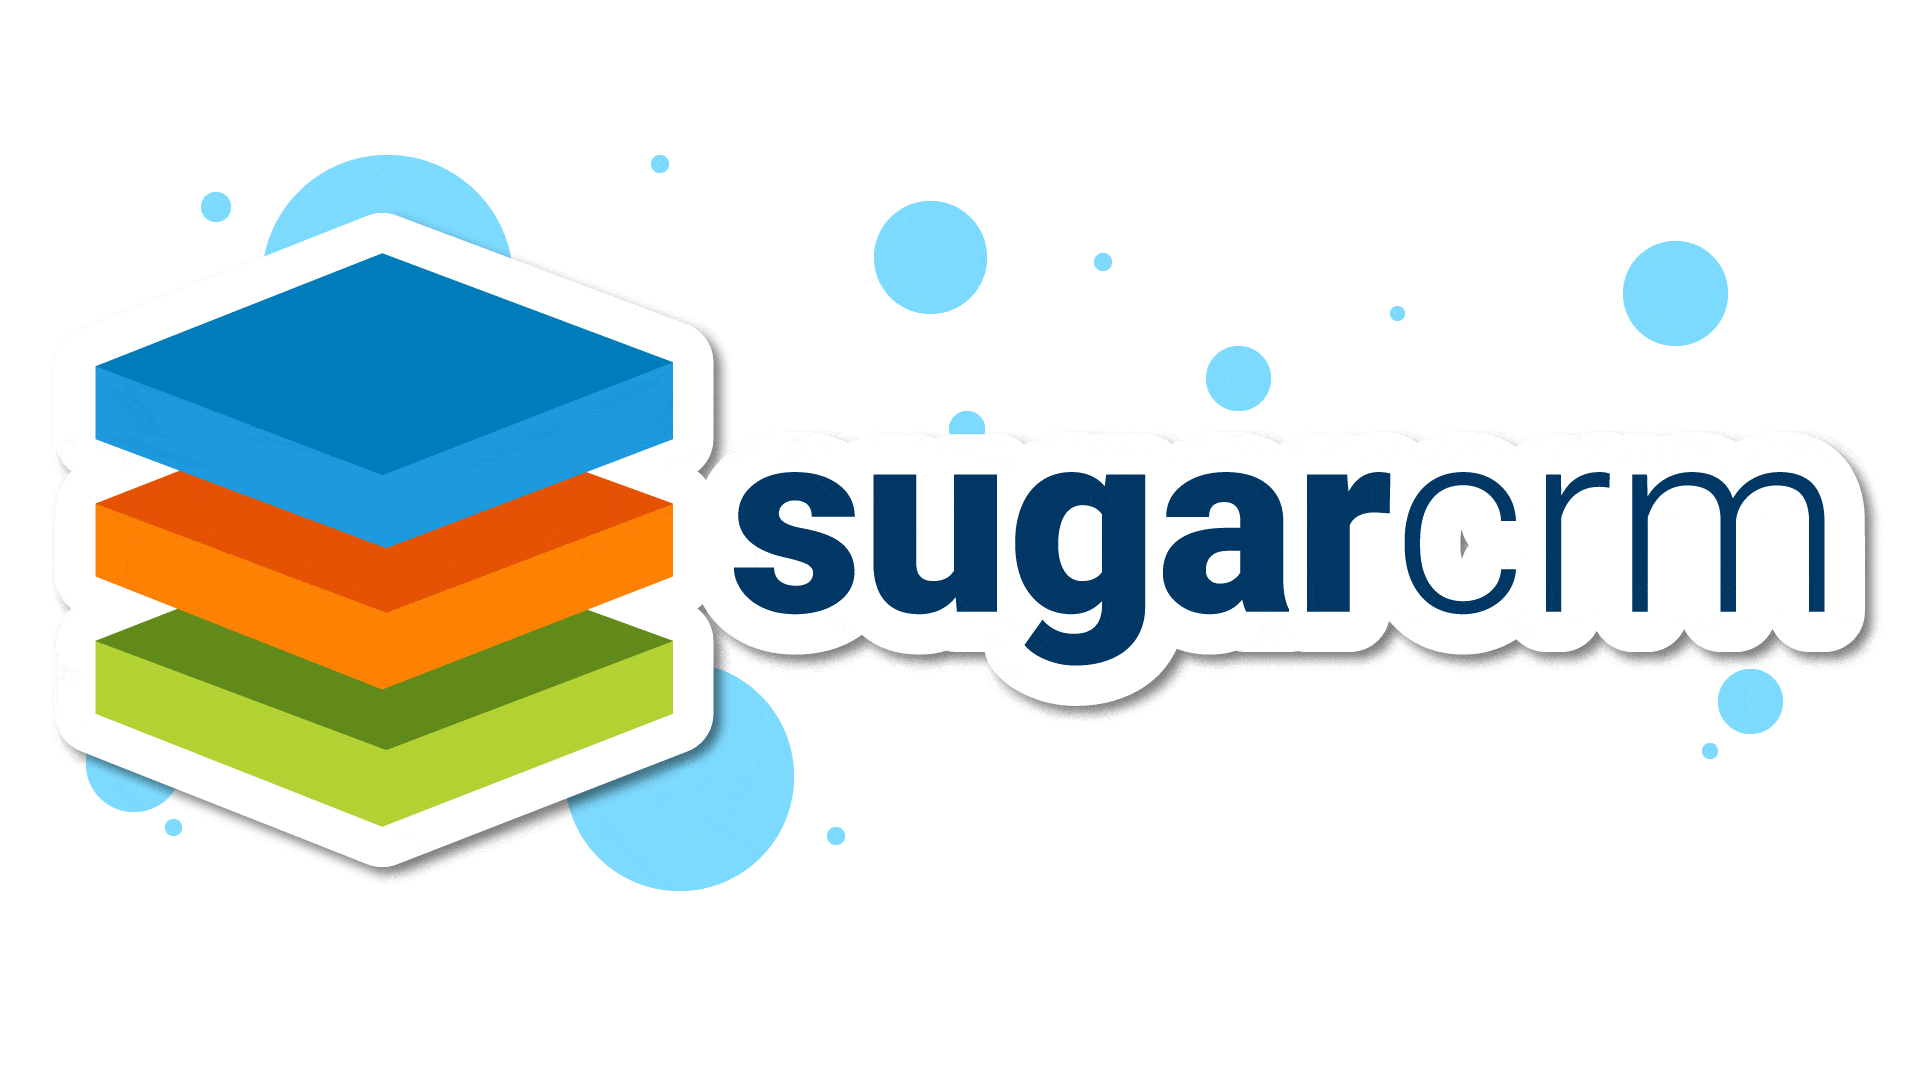 sugarcrm vs salesforce, Marketing, Marketing automation, CRM, Comparison, Which is better, contact management, Features, Configurability, social media integration